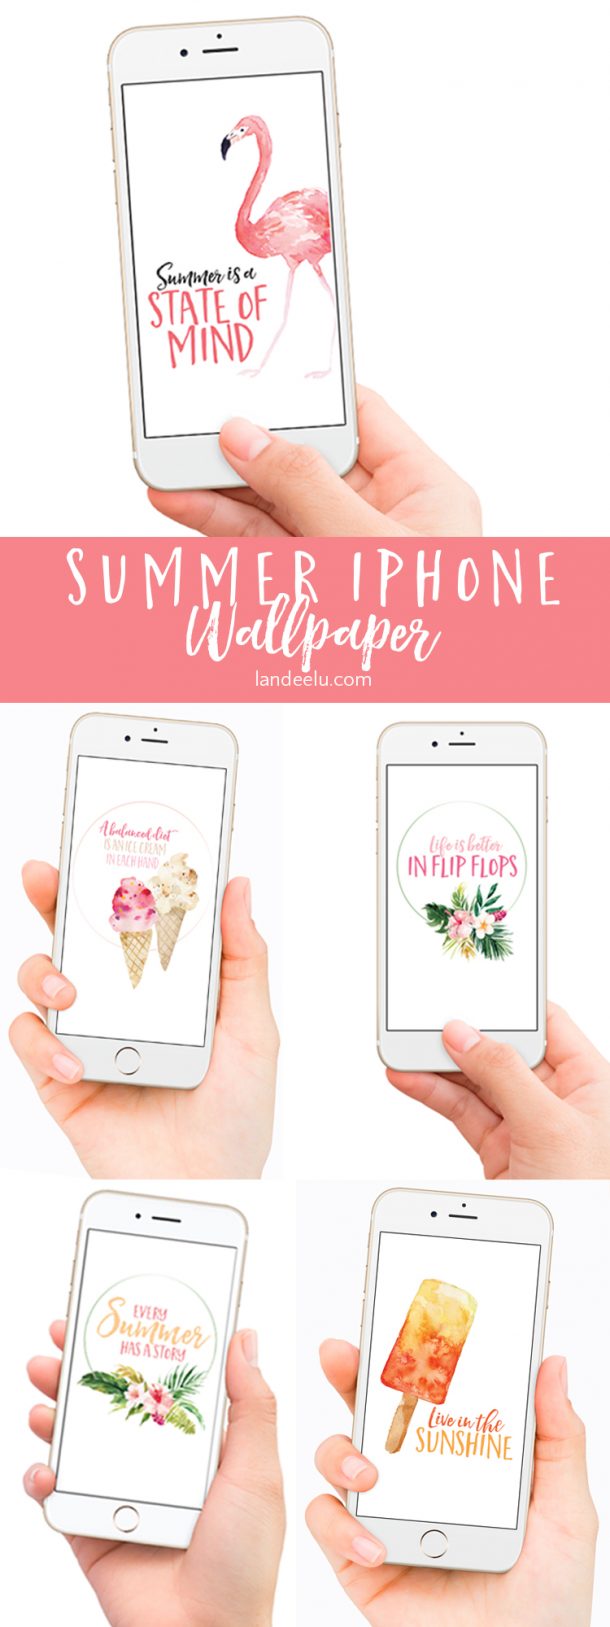 Change Your Iphone Wallpaper To Go With The Seasons - Smartphone - HD Wallpaper 